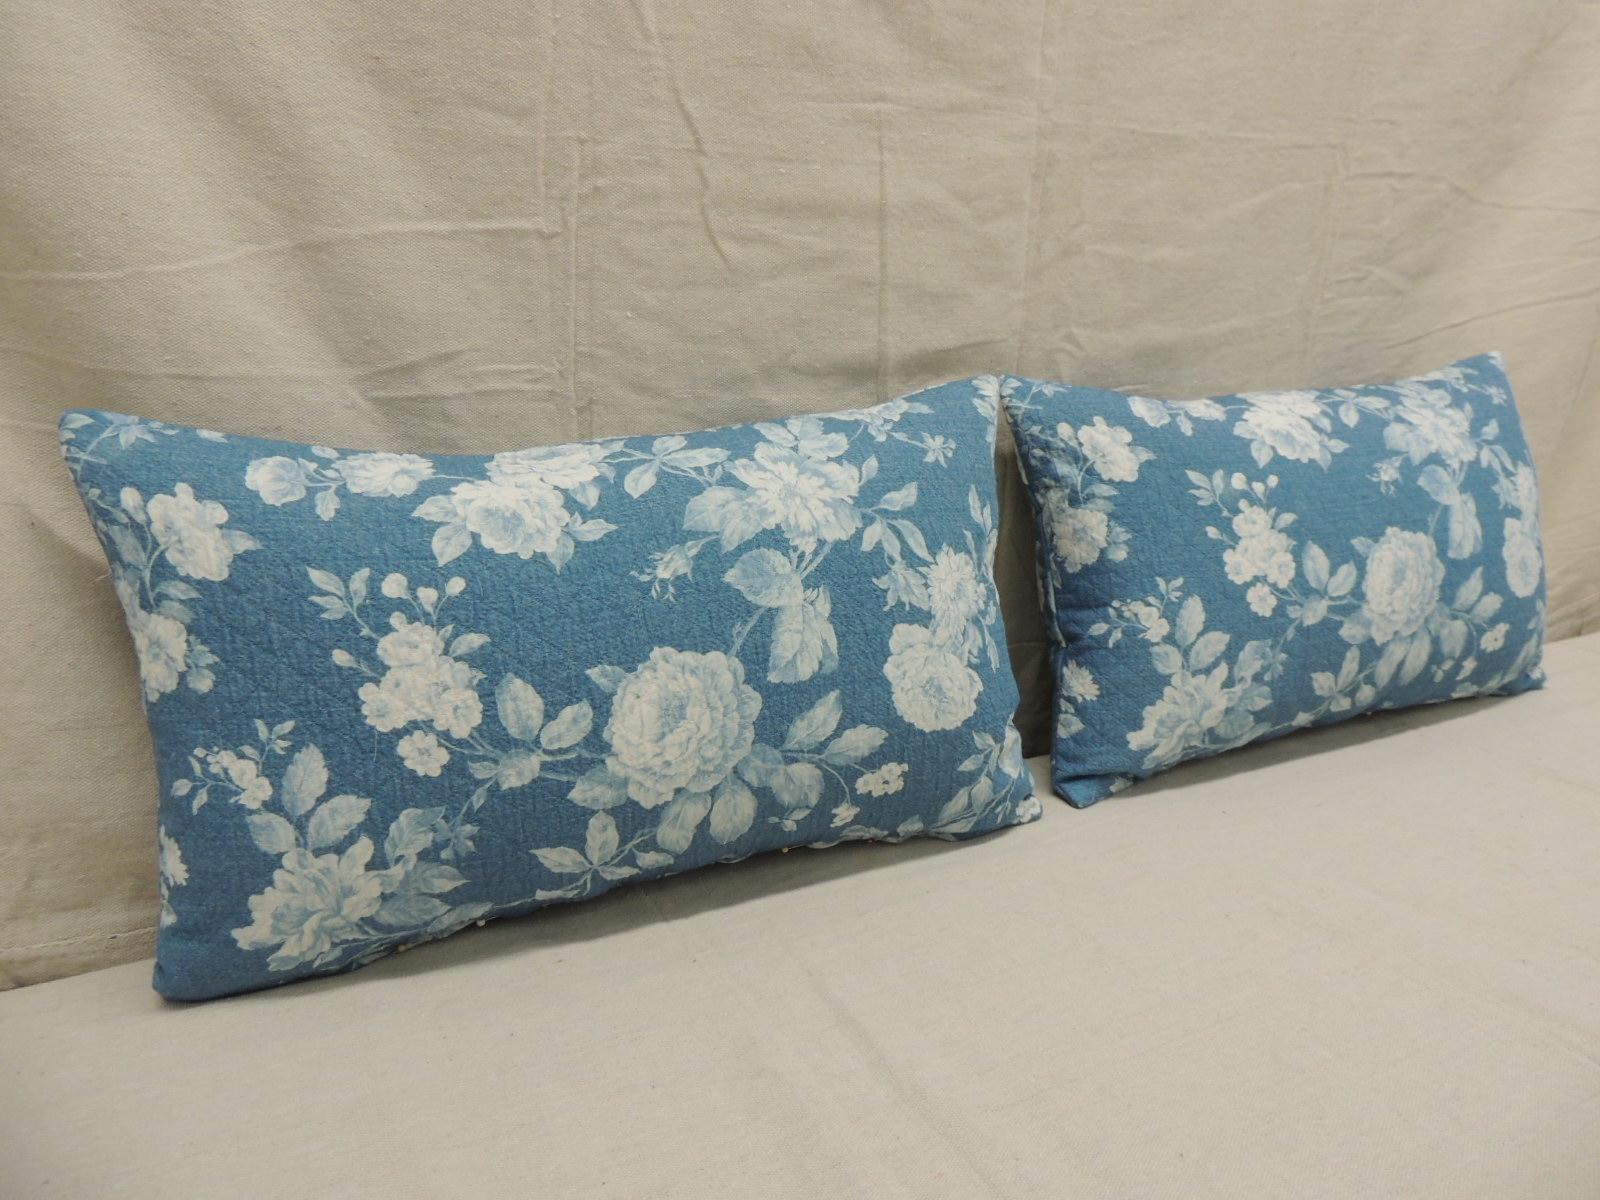 Pair of modern blue and white quilted cotton floral decorative lumbar pillows.
Decorative pillow handcrafted and designed in the USA.
Closure by stitch (no zipper closure) with custom-made pillow insert.
Size: 12